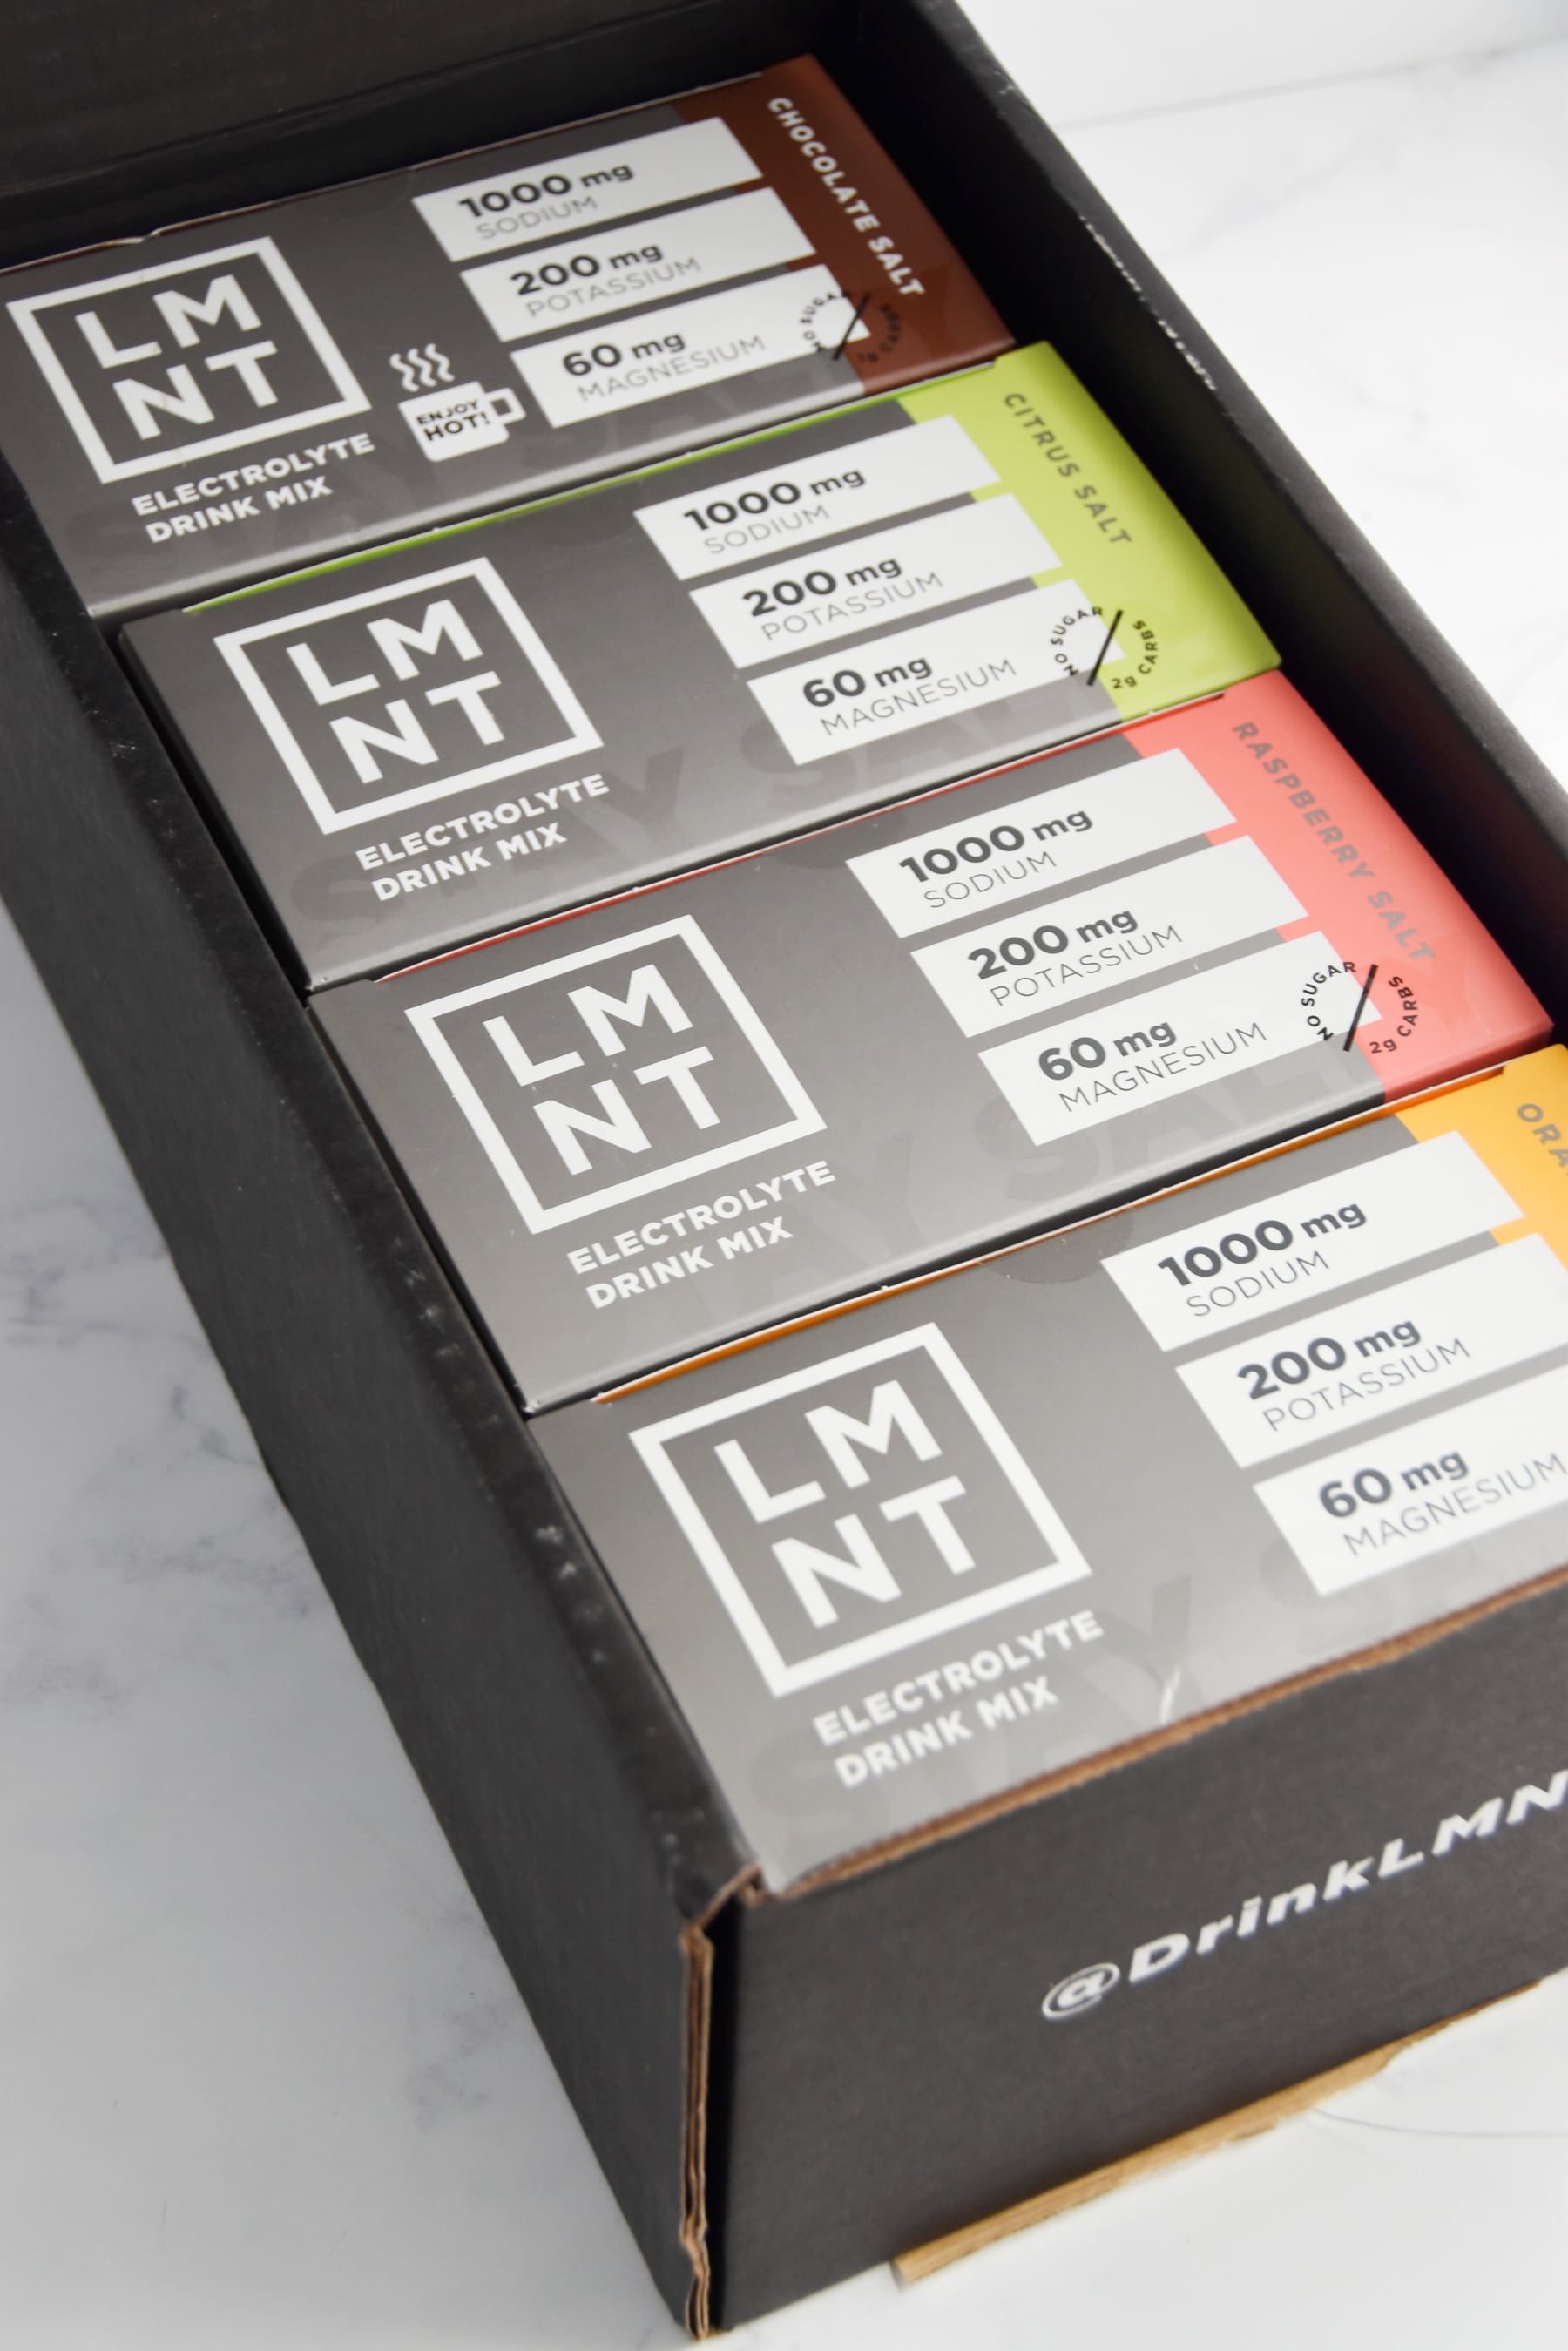 Order of four boxes of LMNT with sodium, potassium, and magnesium.